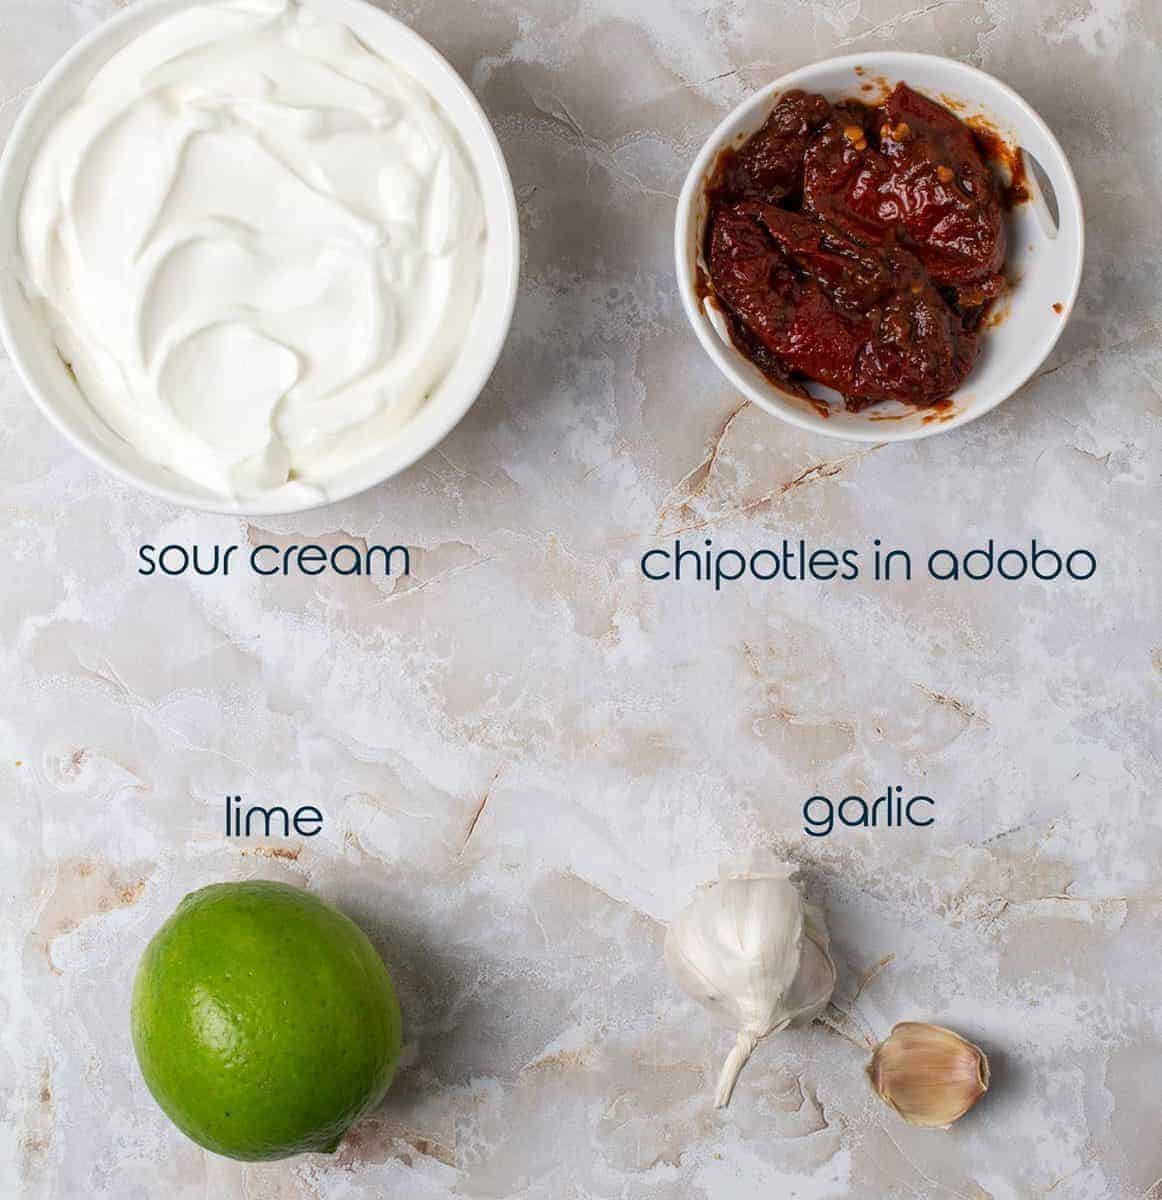 Four ingredients for chipotle sauce with sour cream, garlic, lime, and adobo peppers.